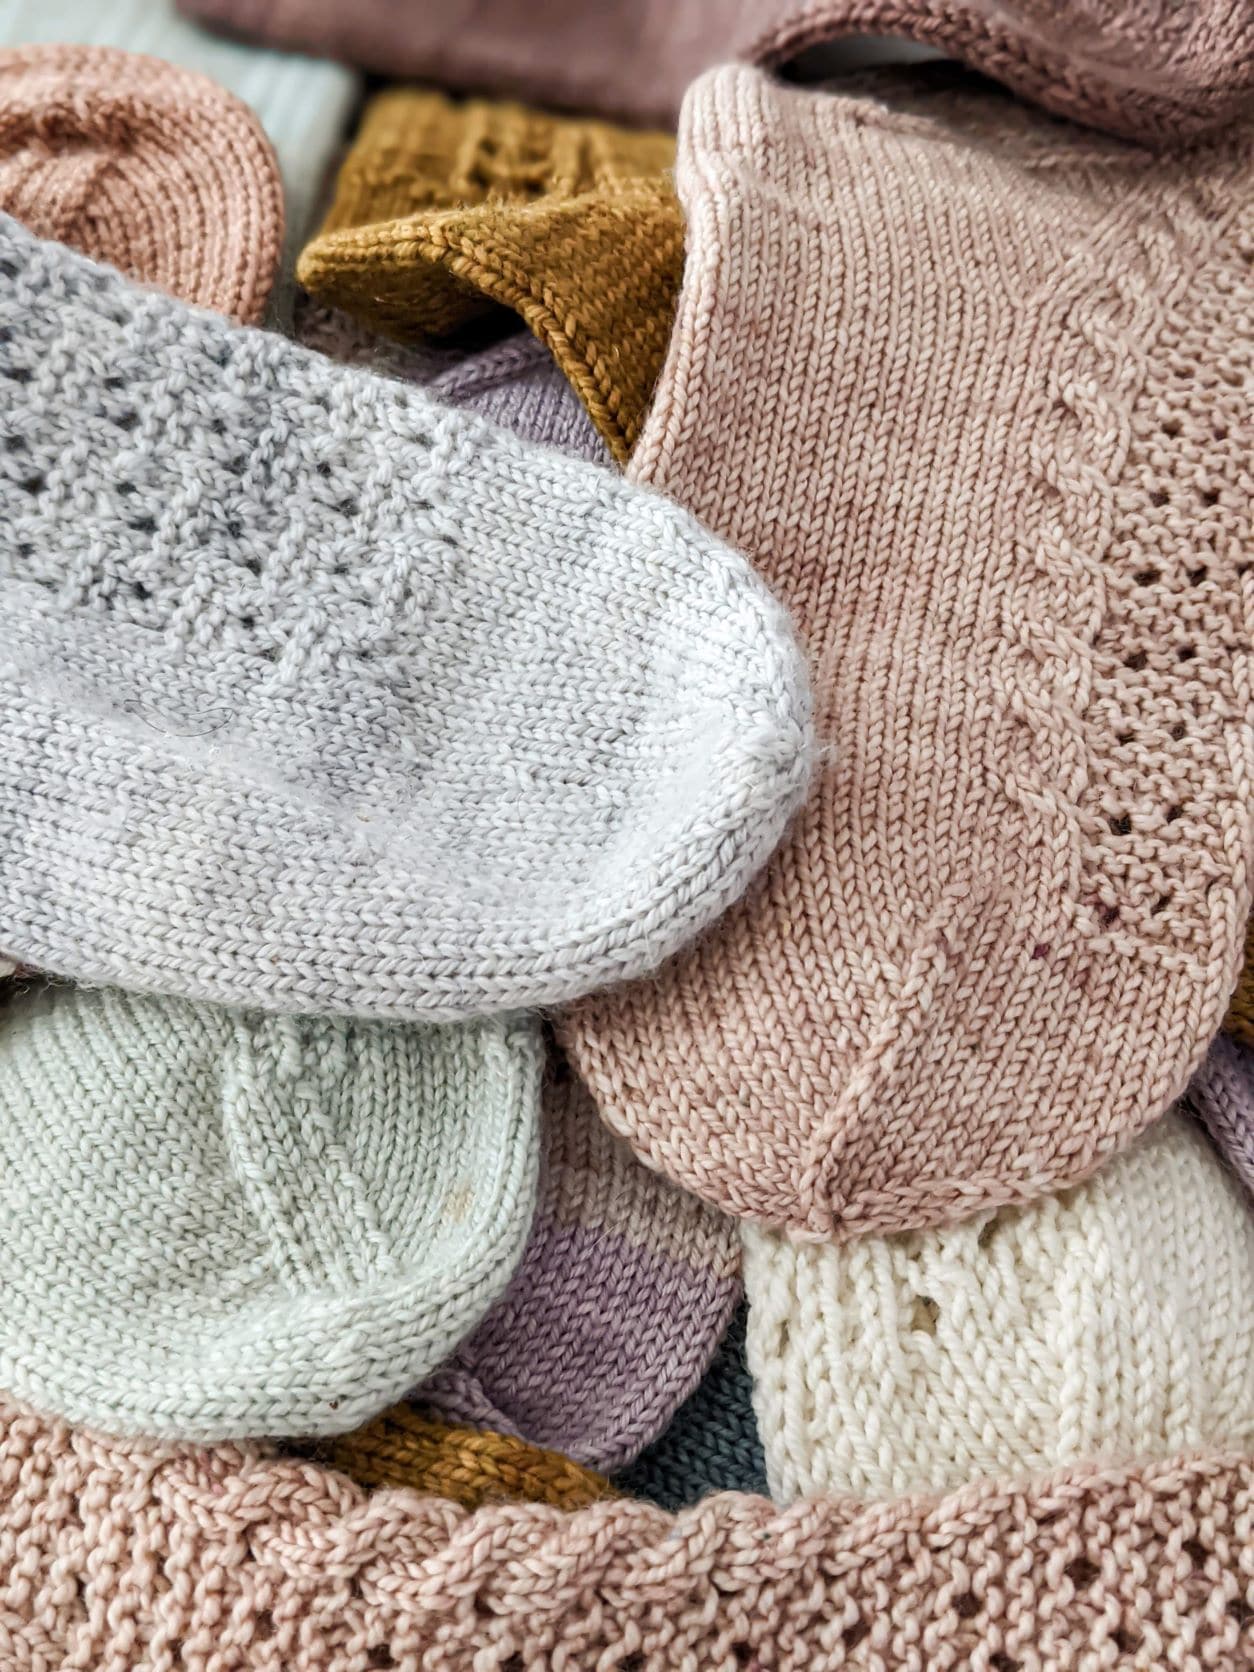 A pile of pastel colored socks jumbled together. The image is zoomed in on a pale blue sock with a round toe, a pale pink sock with a star toe, and a pale green sock with a wedge toe.